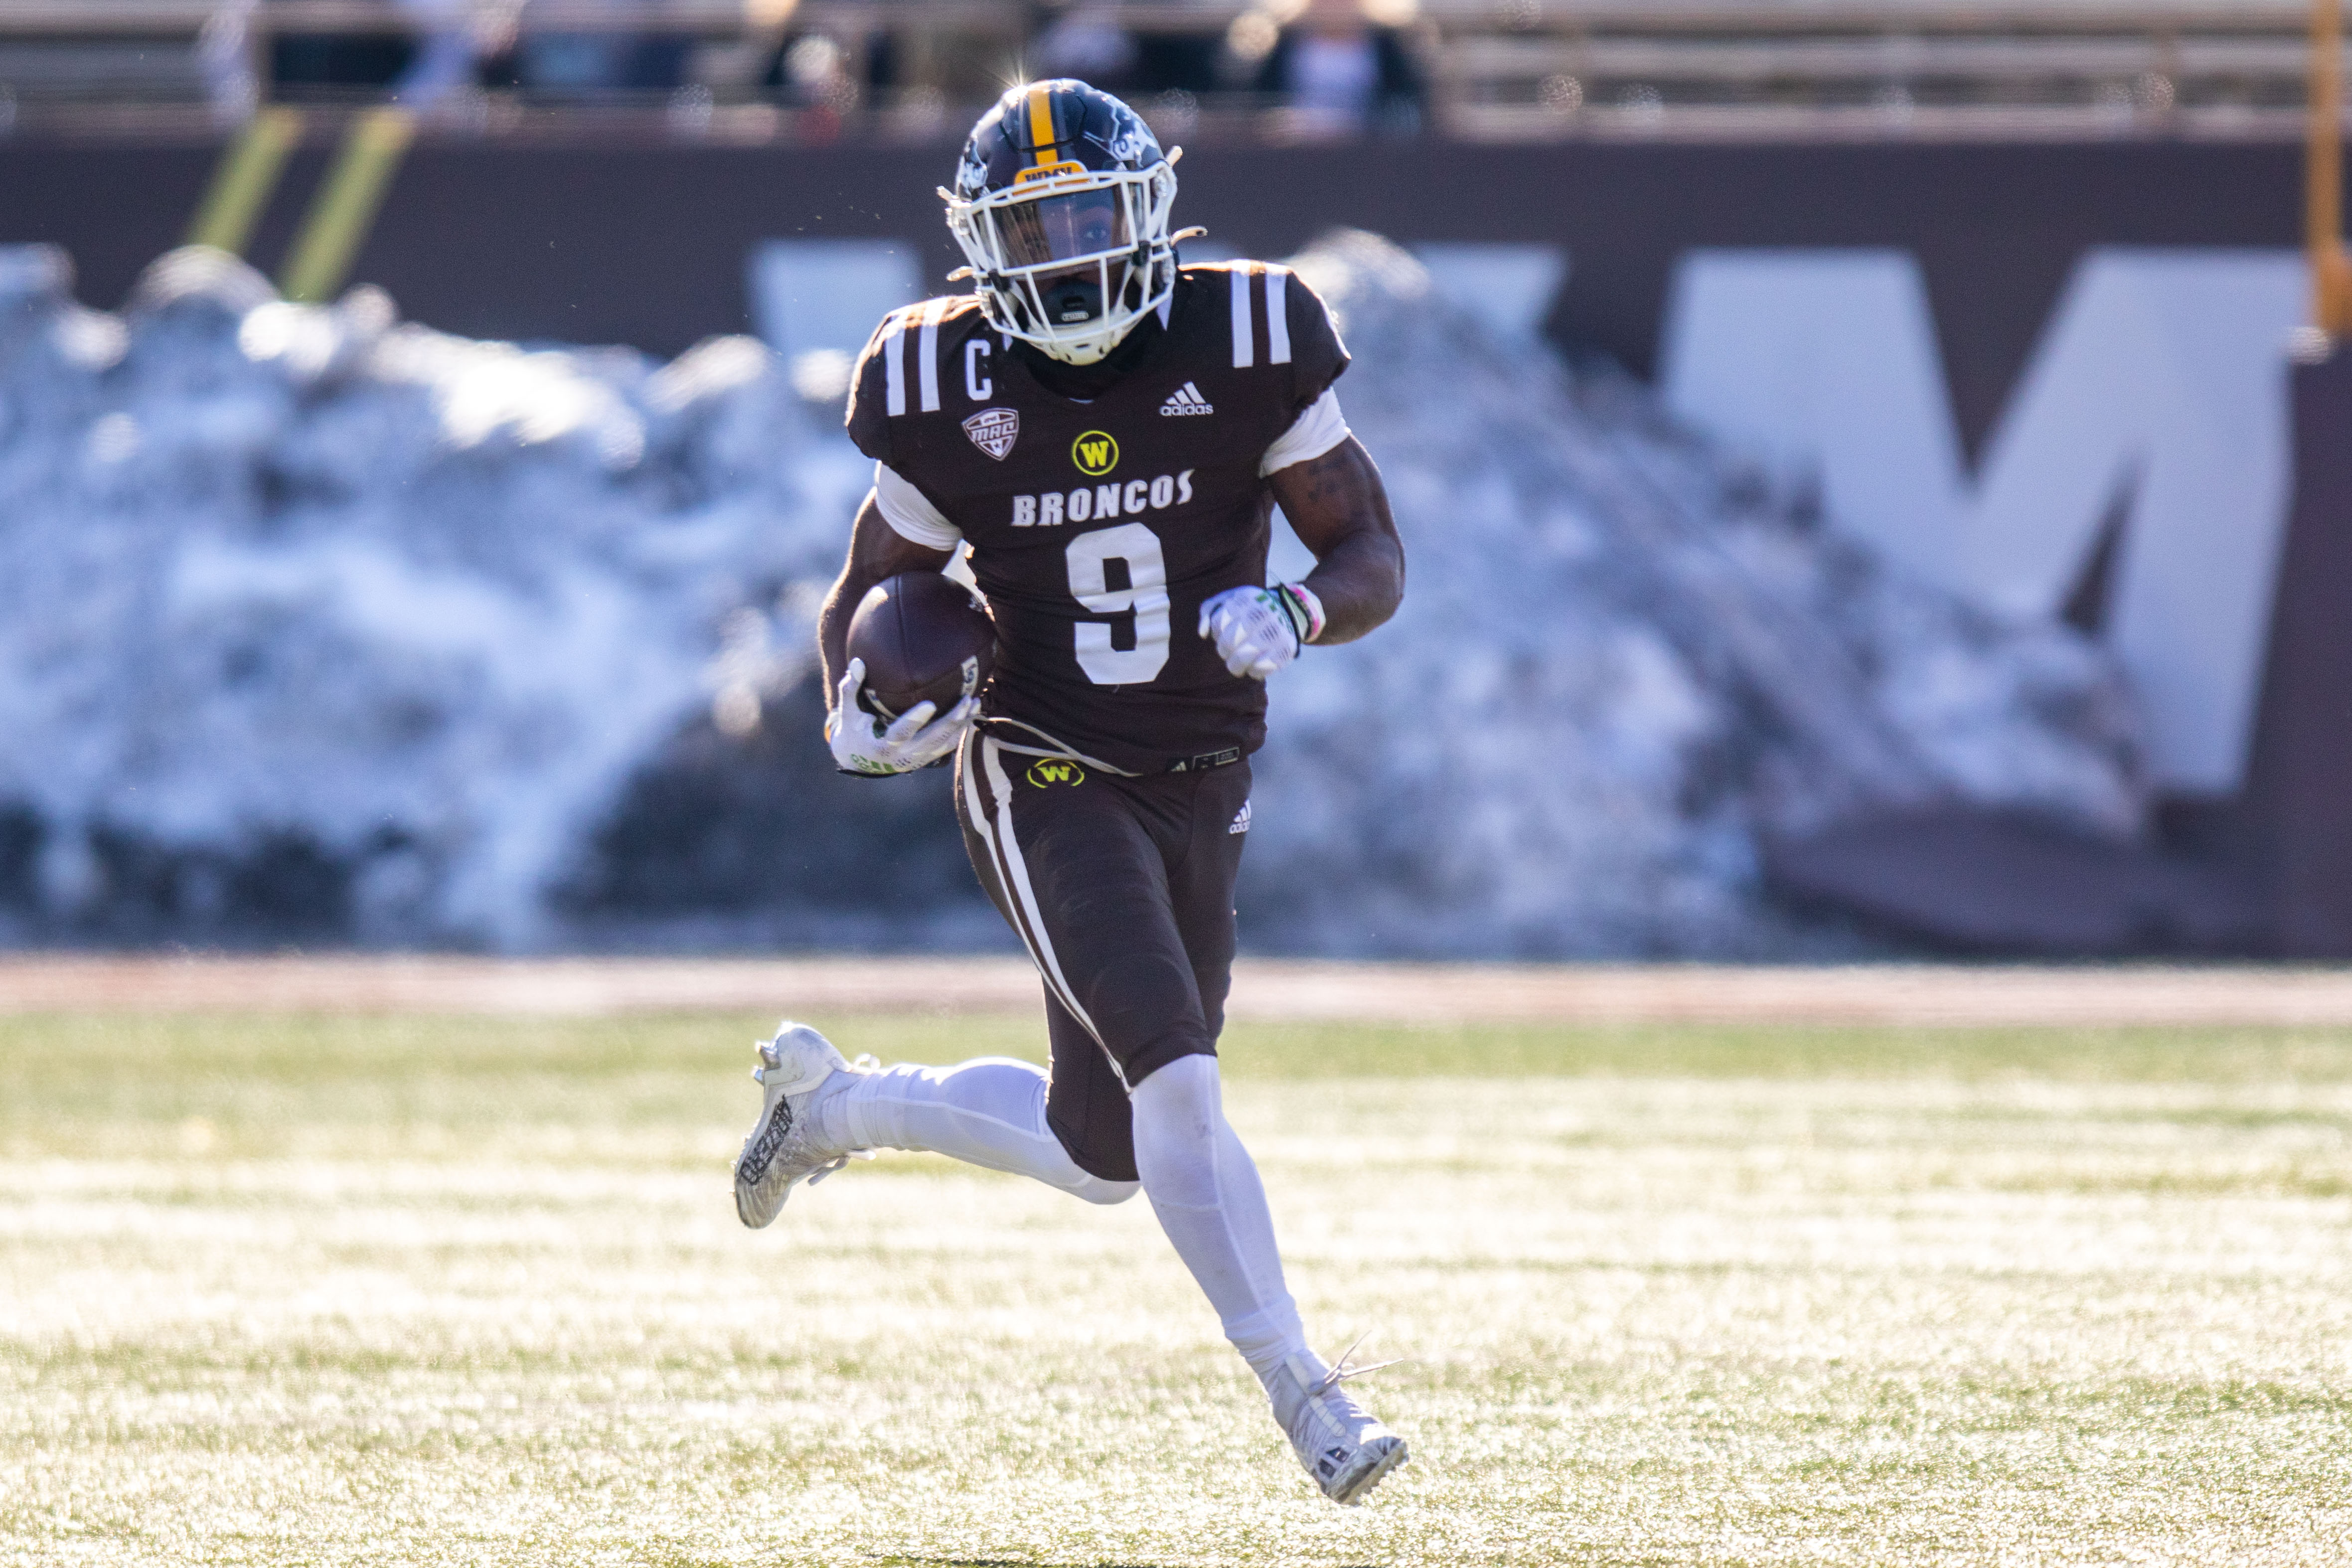 Inside scoop on Minnesota's transfers from Western Michigan - The